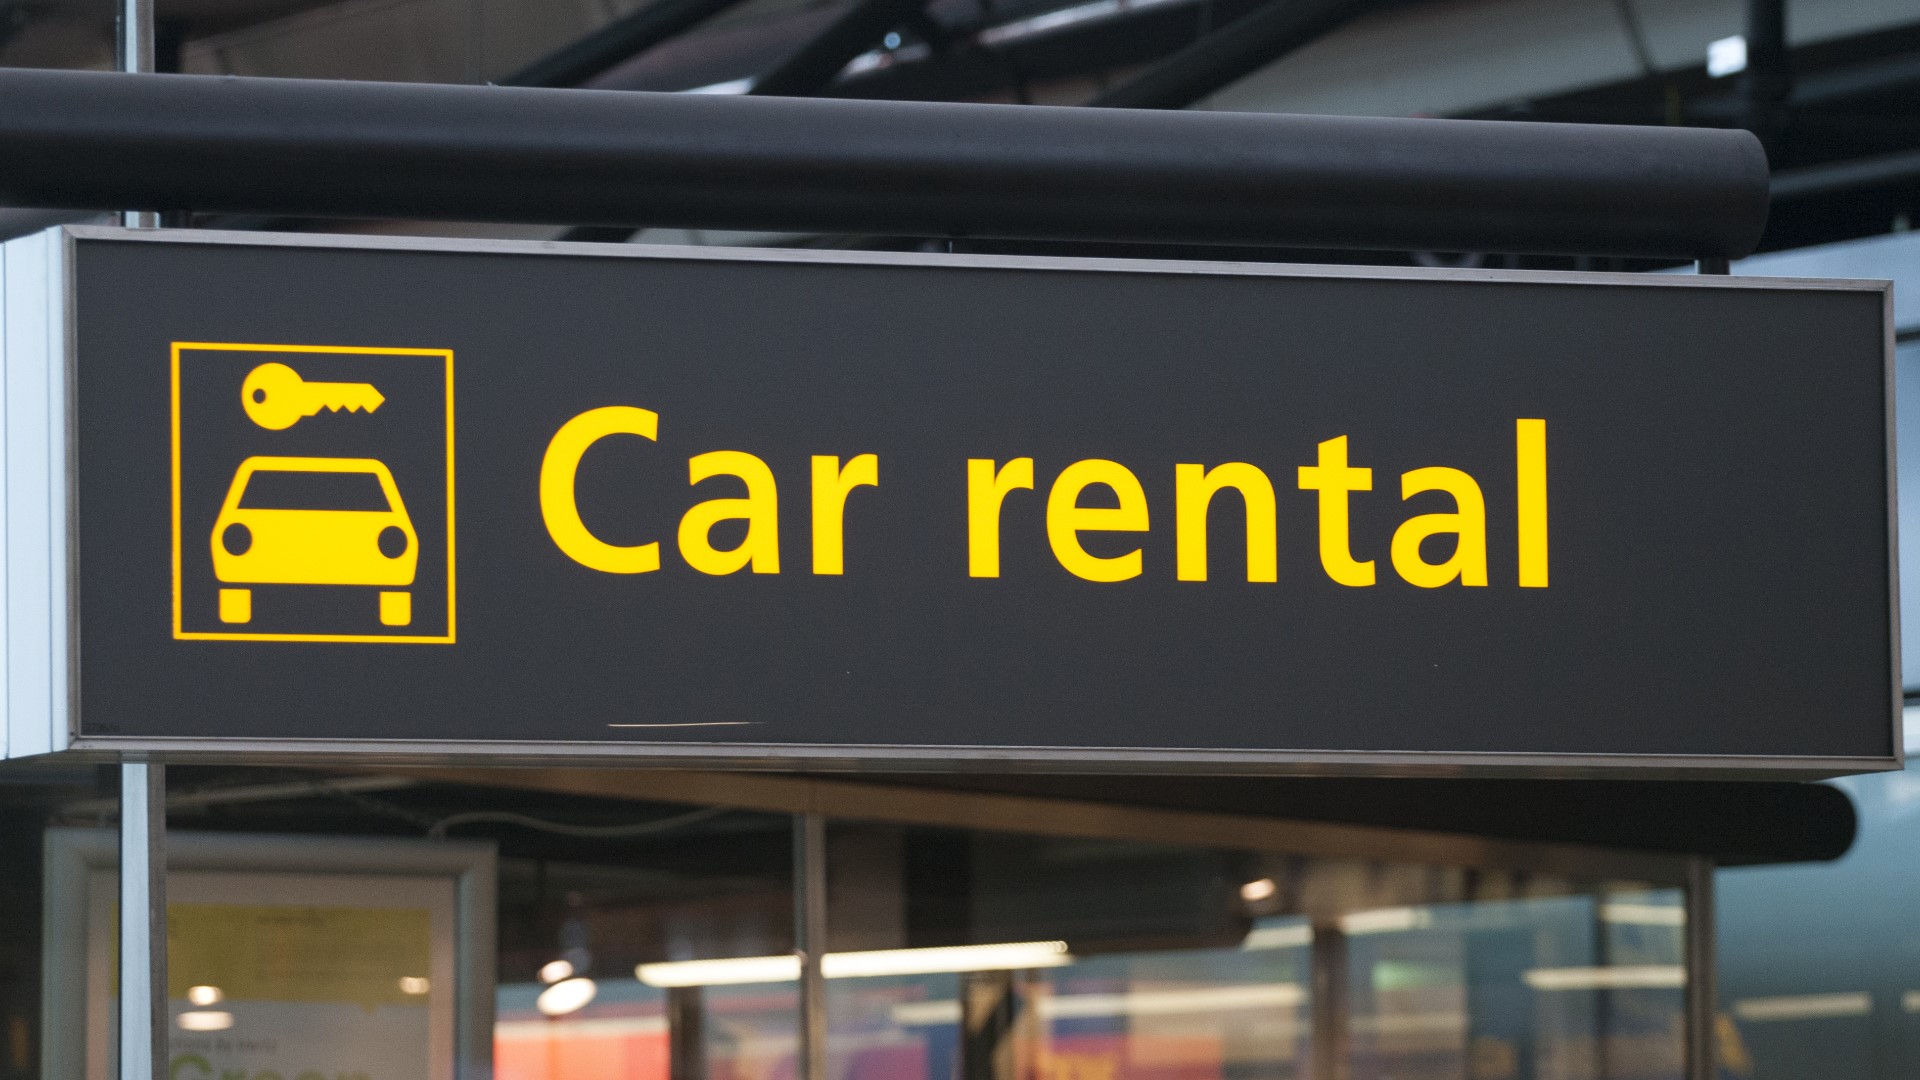 Rental companies sold off inventory to stay afloat last year, but are having a hard time buying new cars to replace them.